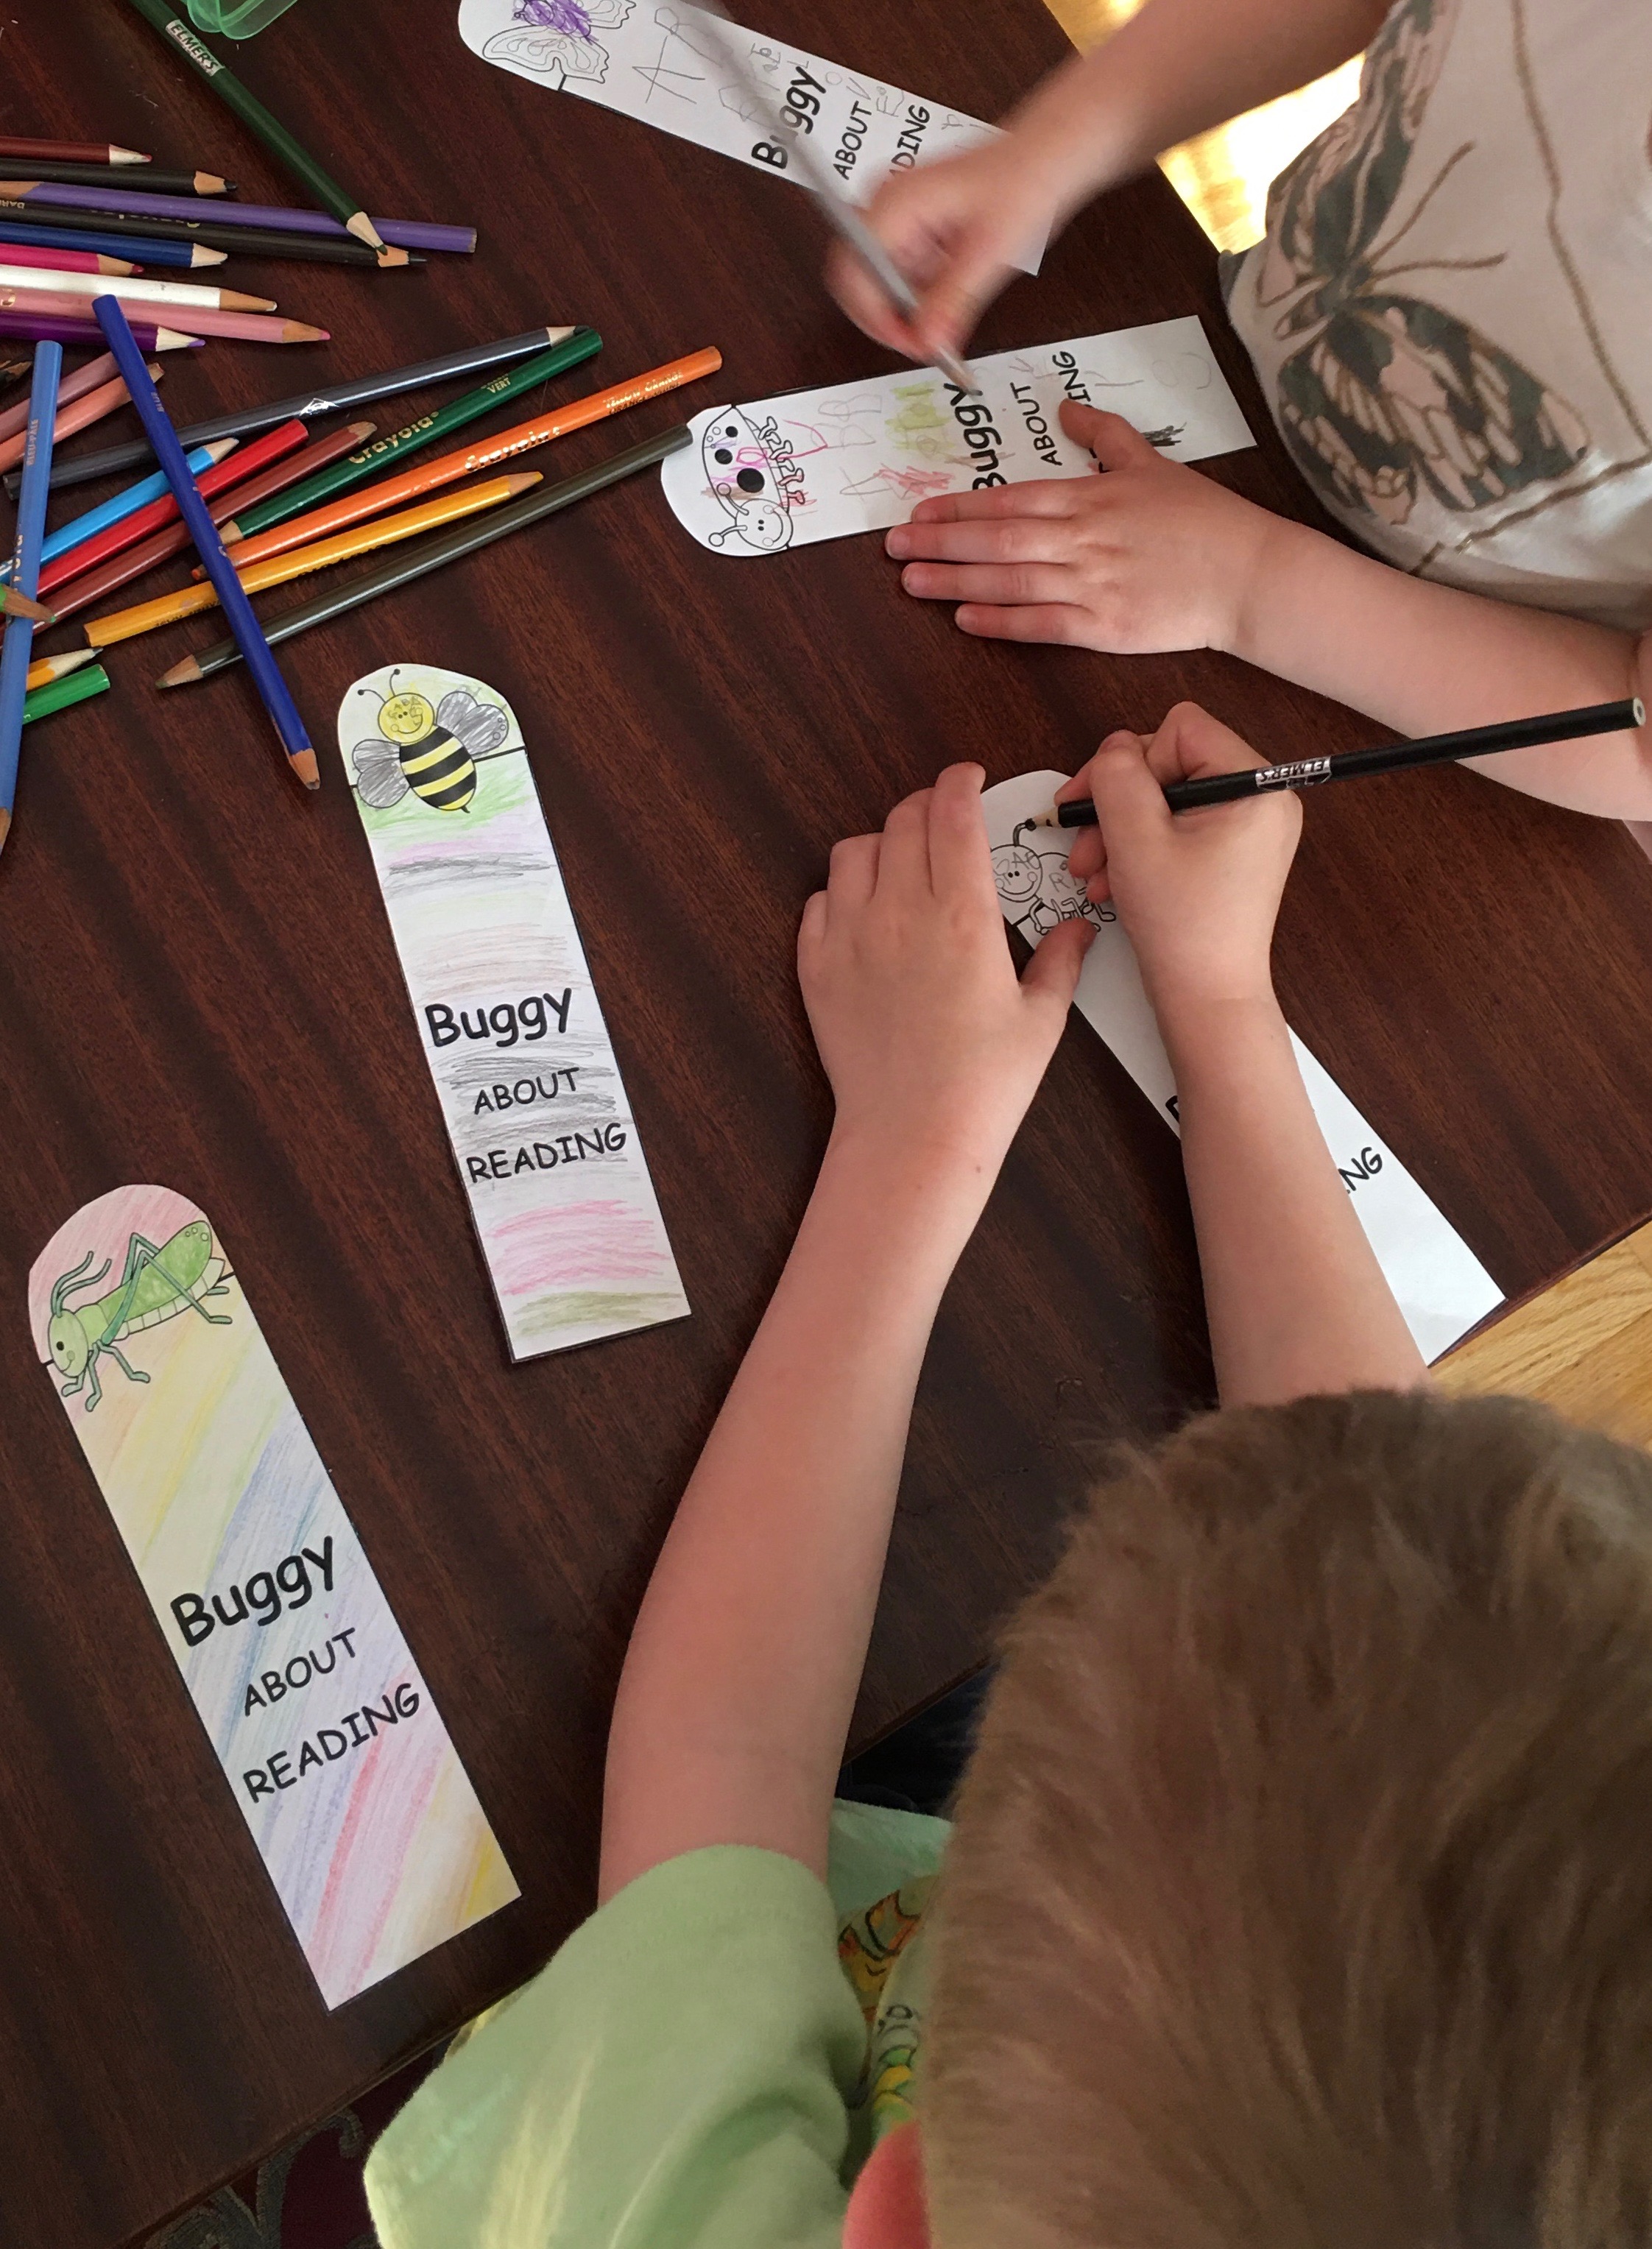 Two children are seeing colouring in paper bookmarks that read Buggy About Reading. Each bookmark has an insect on it.